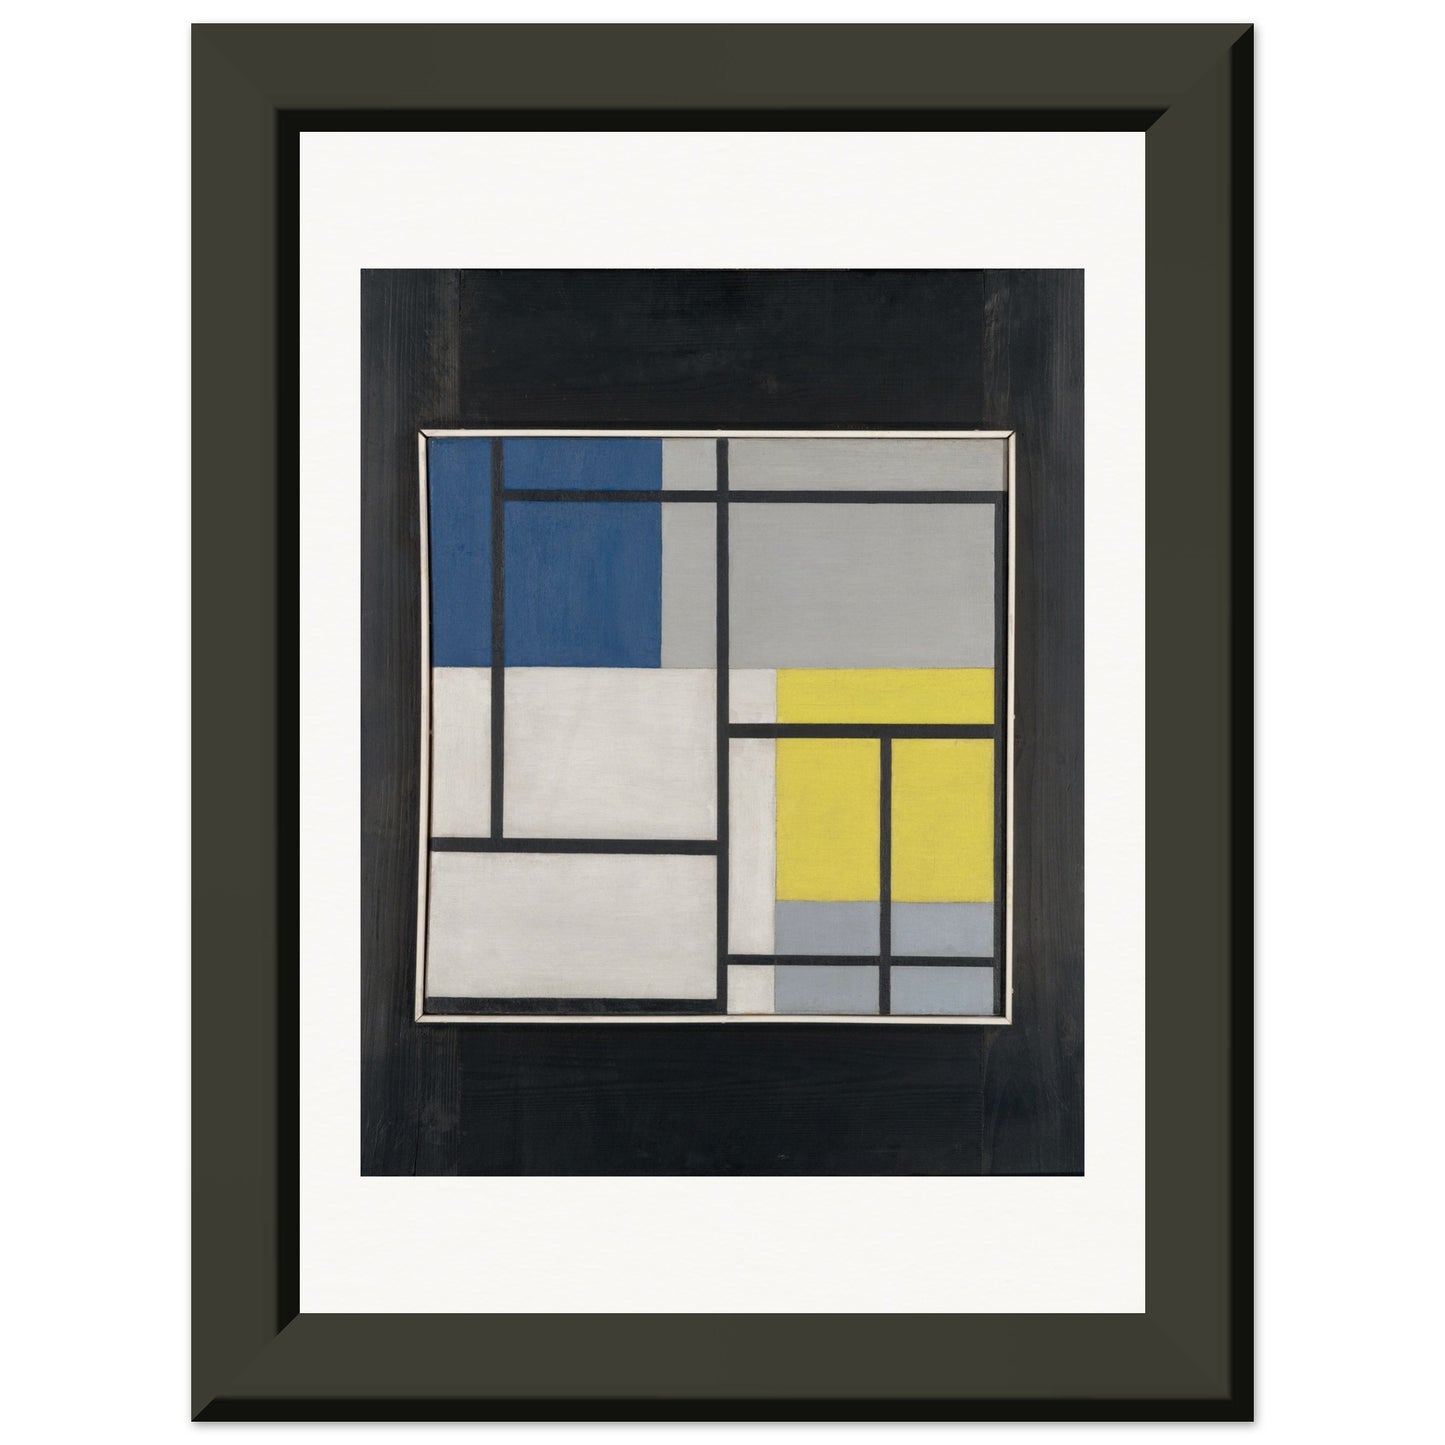 92a9a151-fdd9-4b3f-a10c-9d121676c9dTHEO VAN DOESBURG - SIMULTANEOUS COMPOSITION - MUSEUM MATTE POSTER IN METAL FRAME